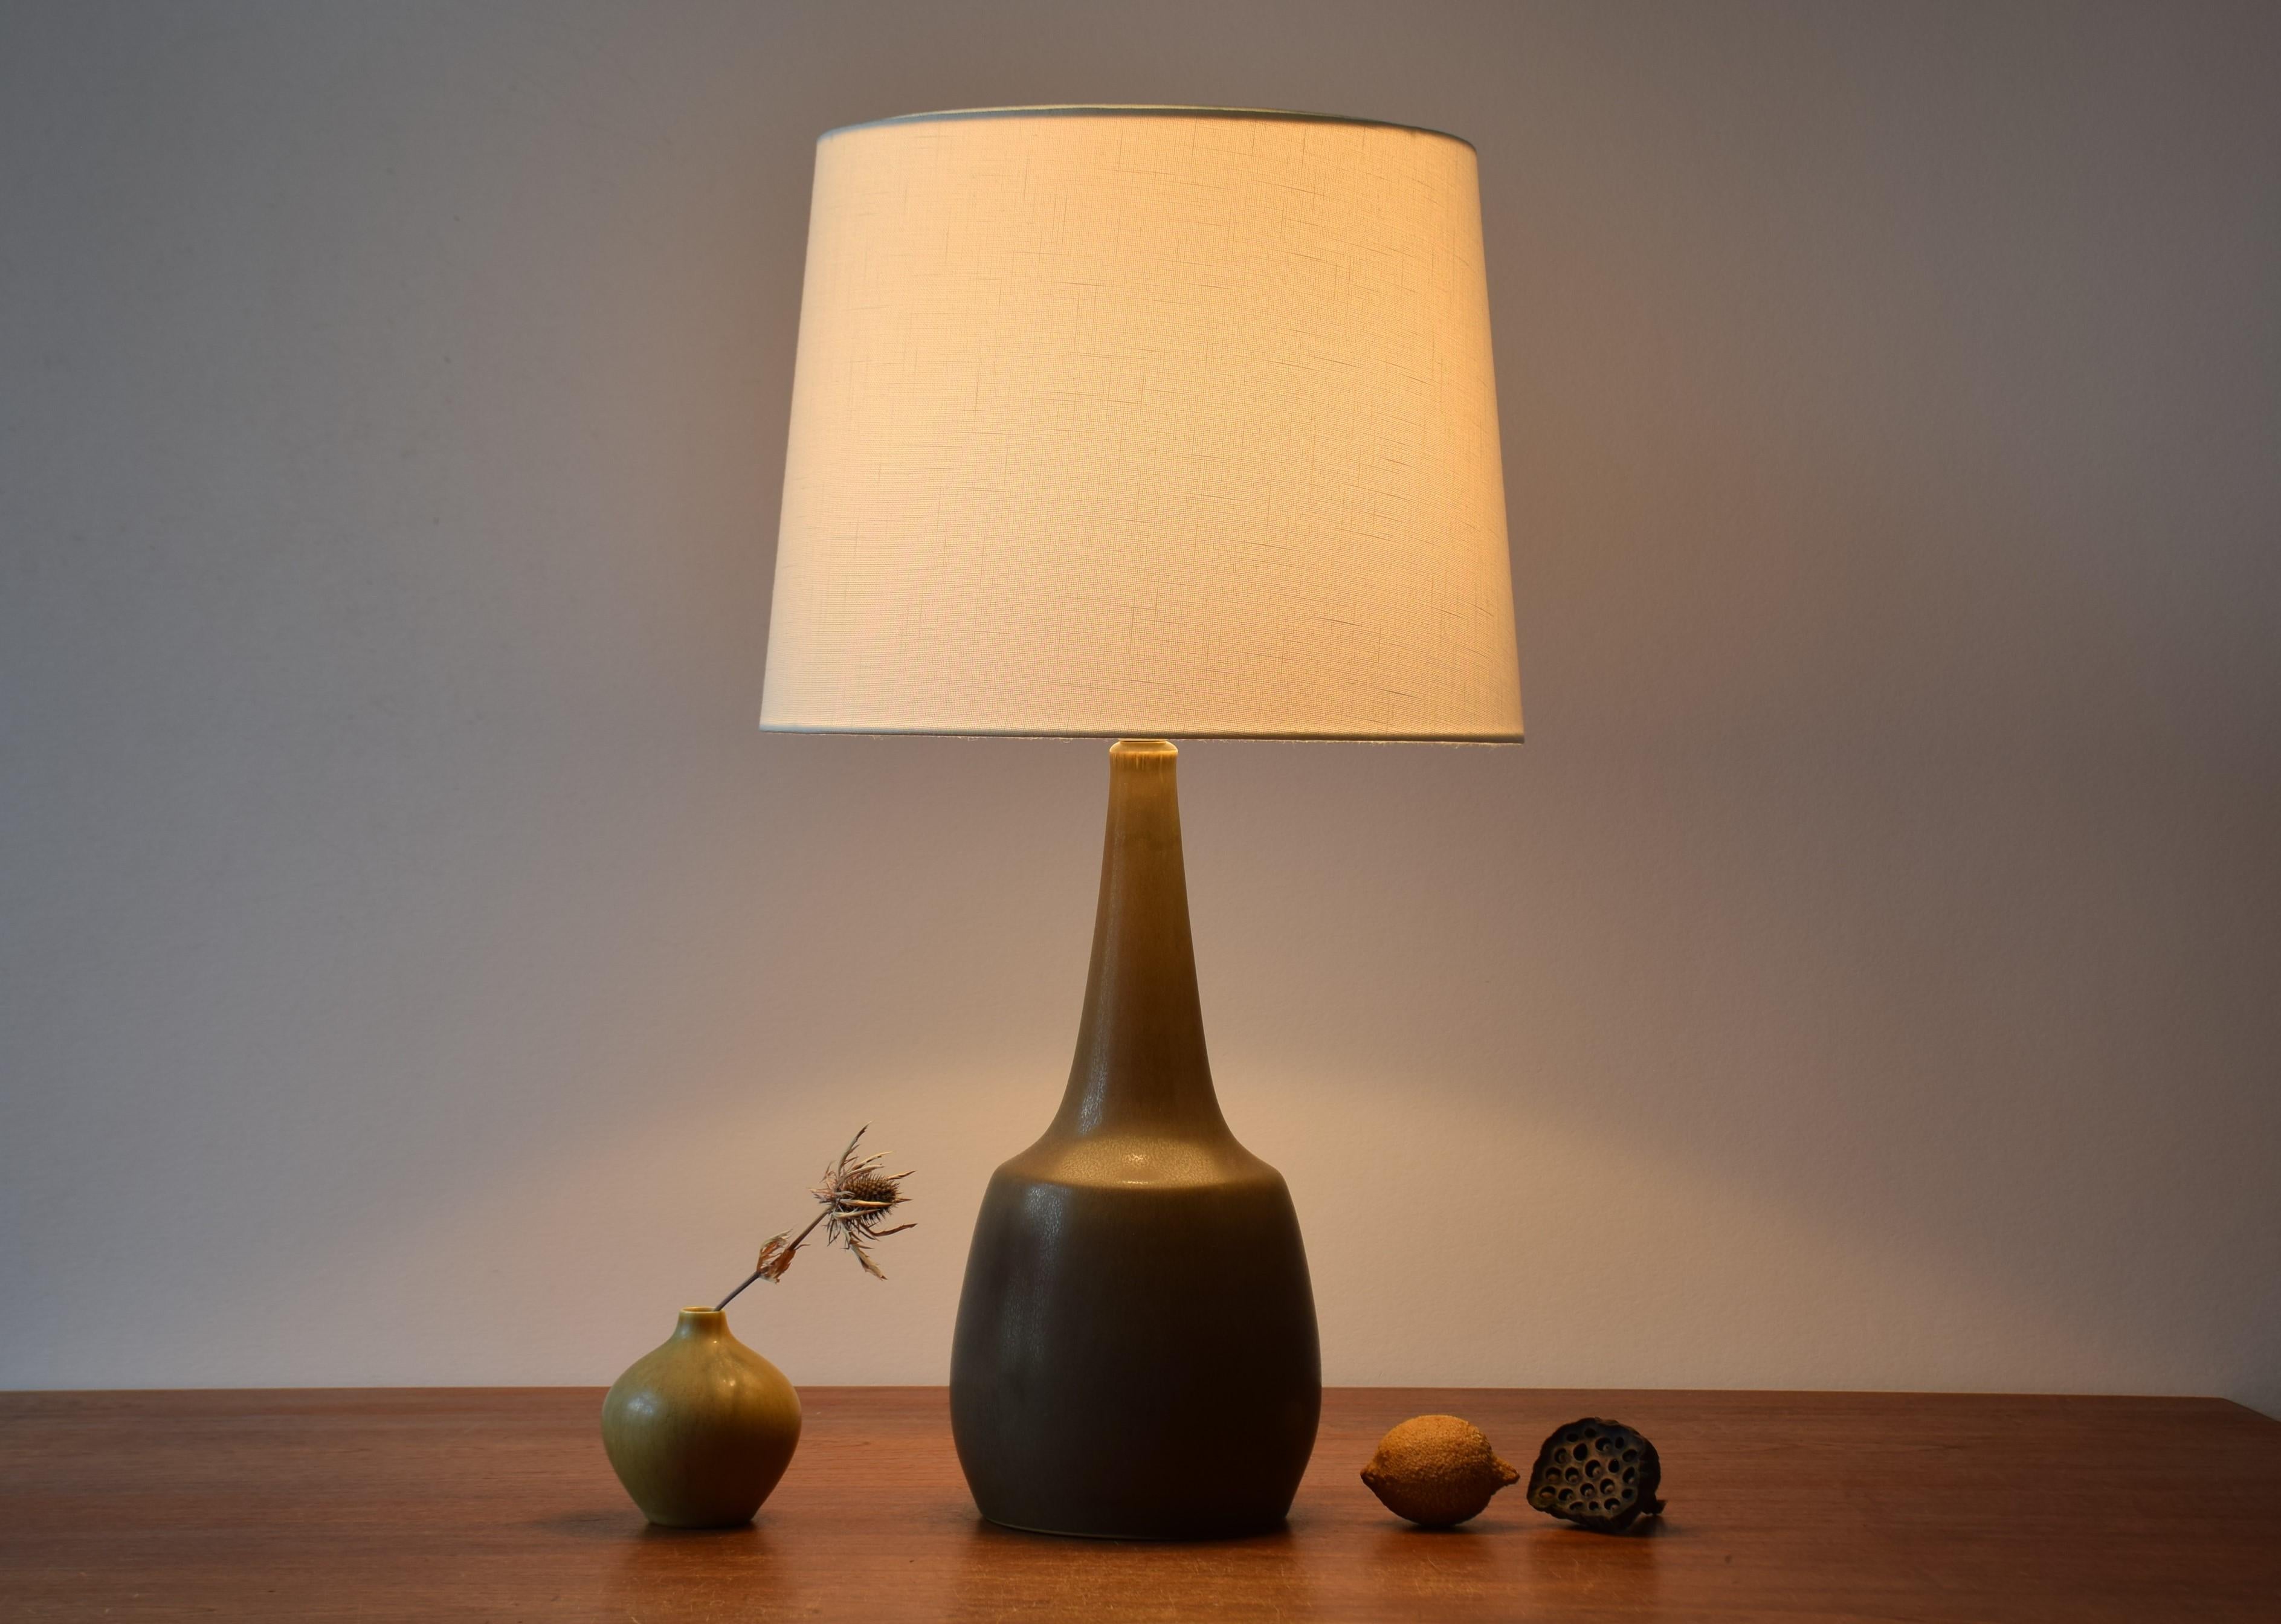 Tall Midcentury Danish table lamp from ceramic workshop Palshus.
The lamp was designed by Per Linnemann-Schmidt and manufactured circa 1950s or early 1960s.

The lamp has a khaki brown haresfur glaze.

Sold without lampshade. The lampshade can be